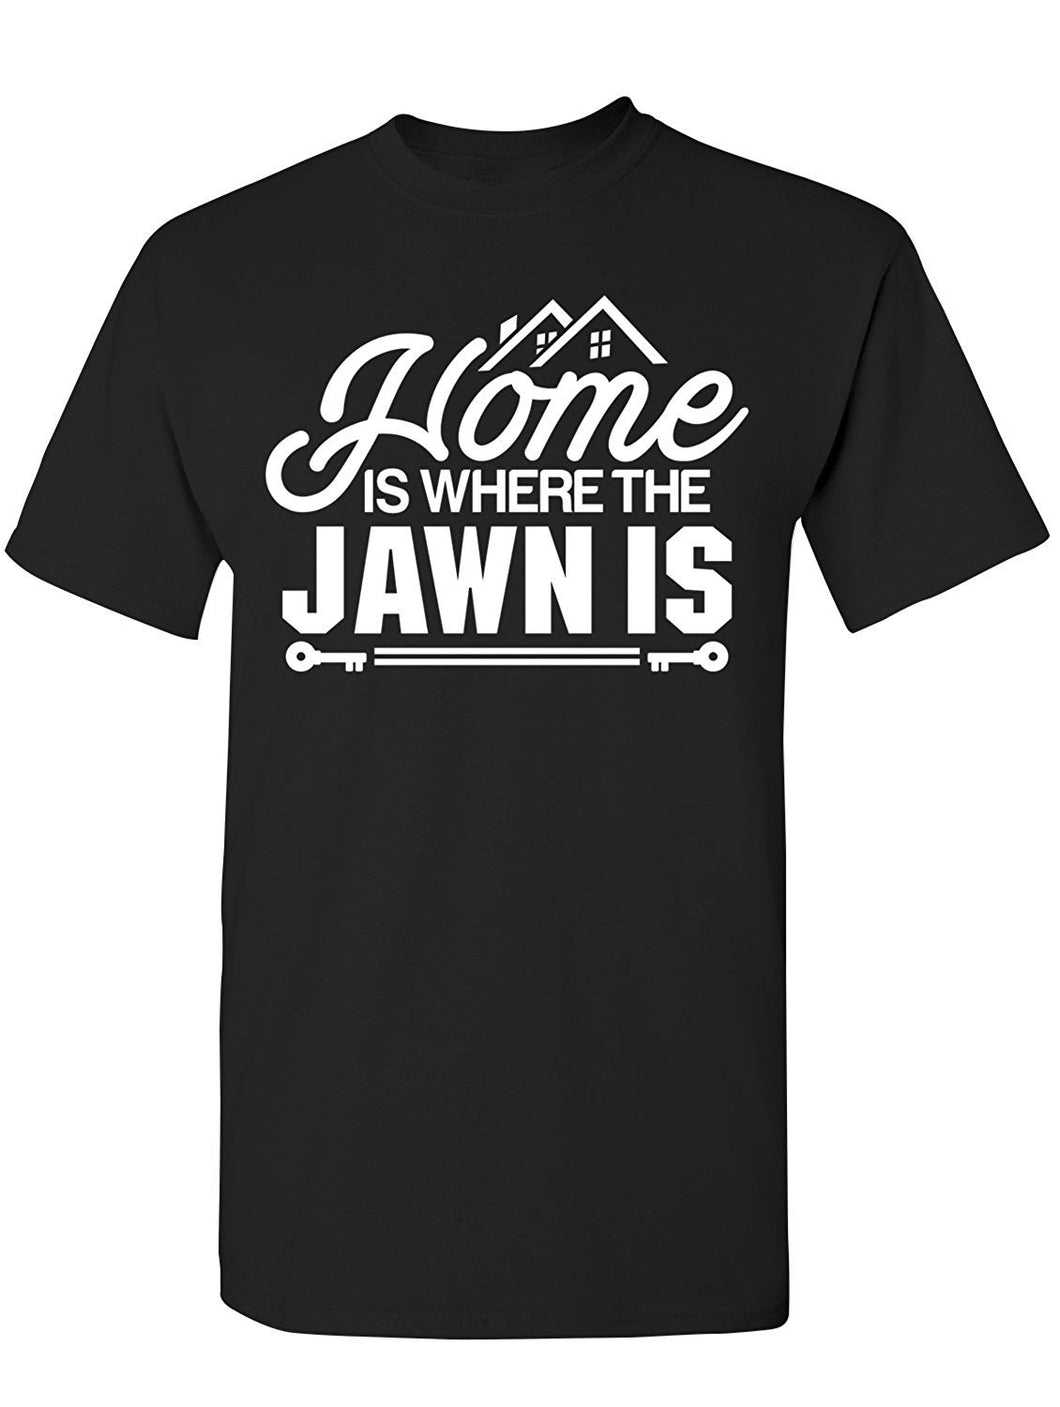 Manateez Men's Philly Home is Where The Jawn Is Tee Shirt